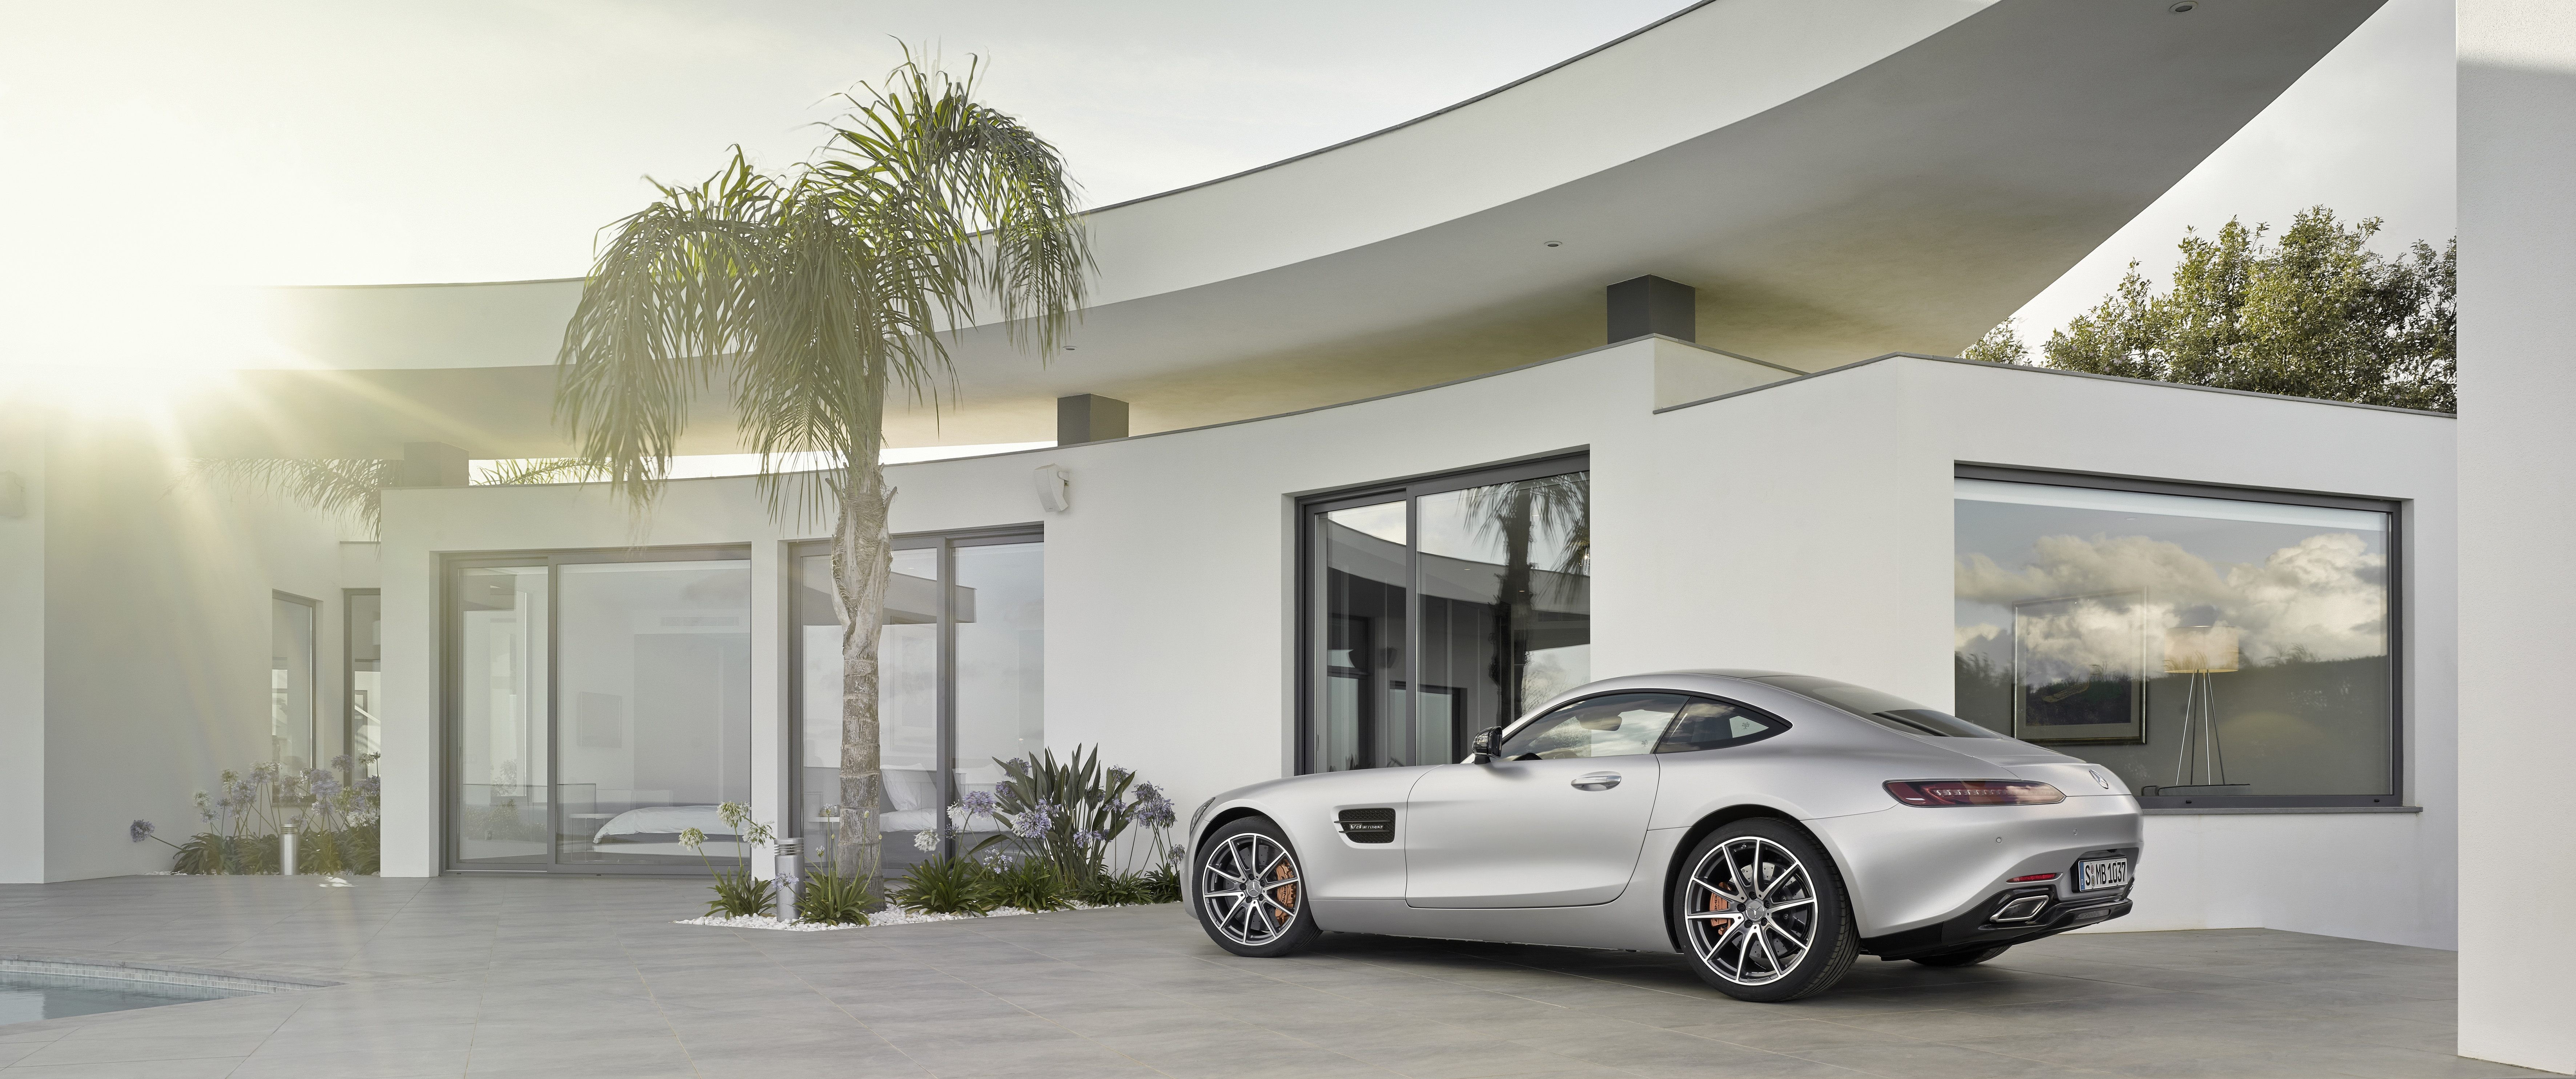 General 7087x2968 car vehicle silver cars house numbers Mercedes-AMG GT Mercedes-Benz German cars Grand Tour